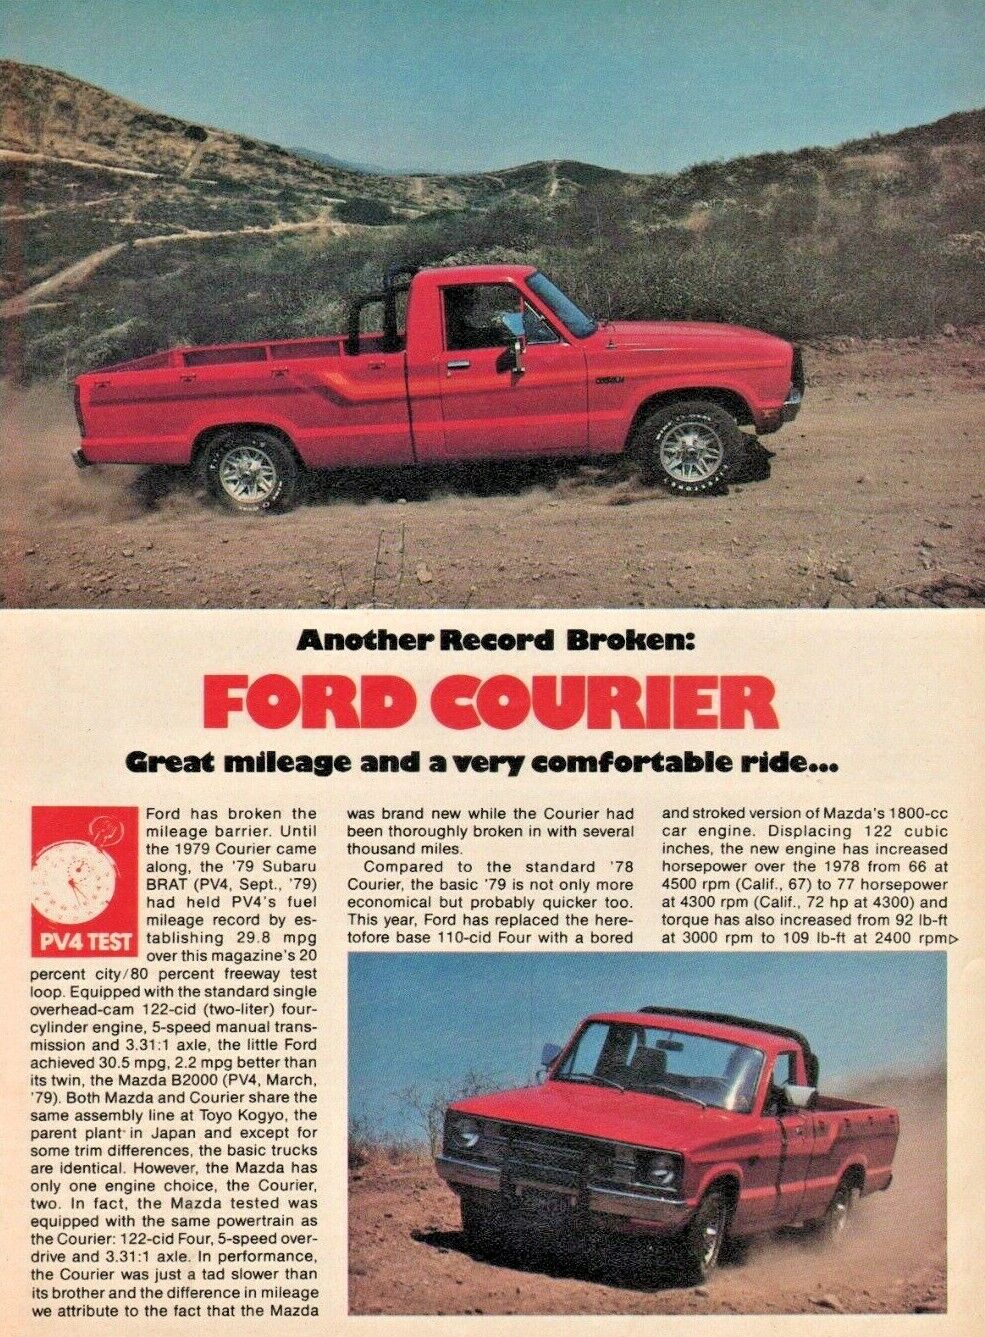 1979 Ford Courier Pickup Truck - 4-Page Vintage Automobile Article